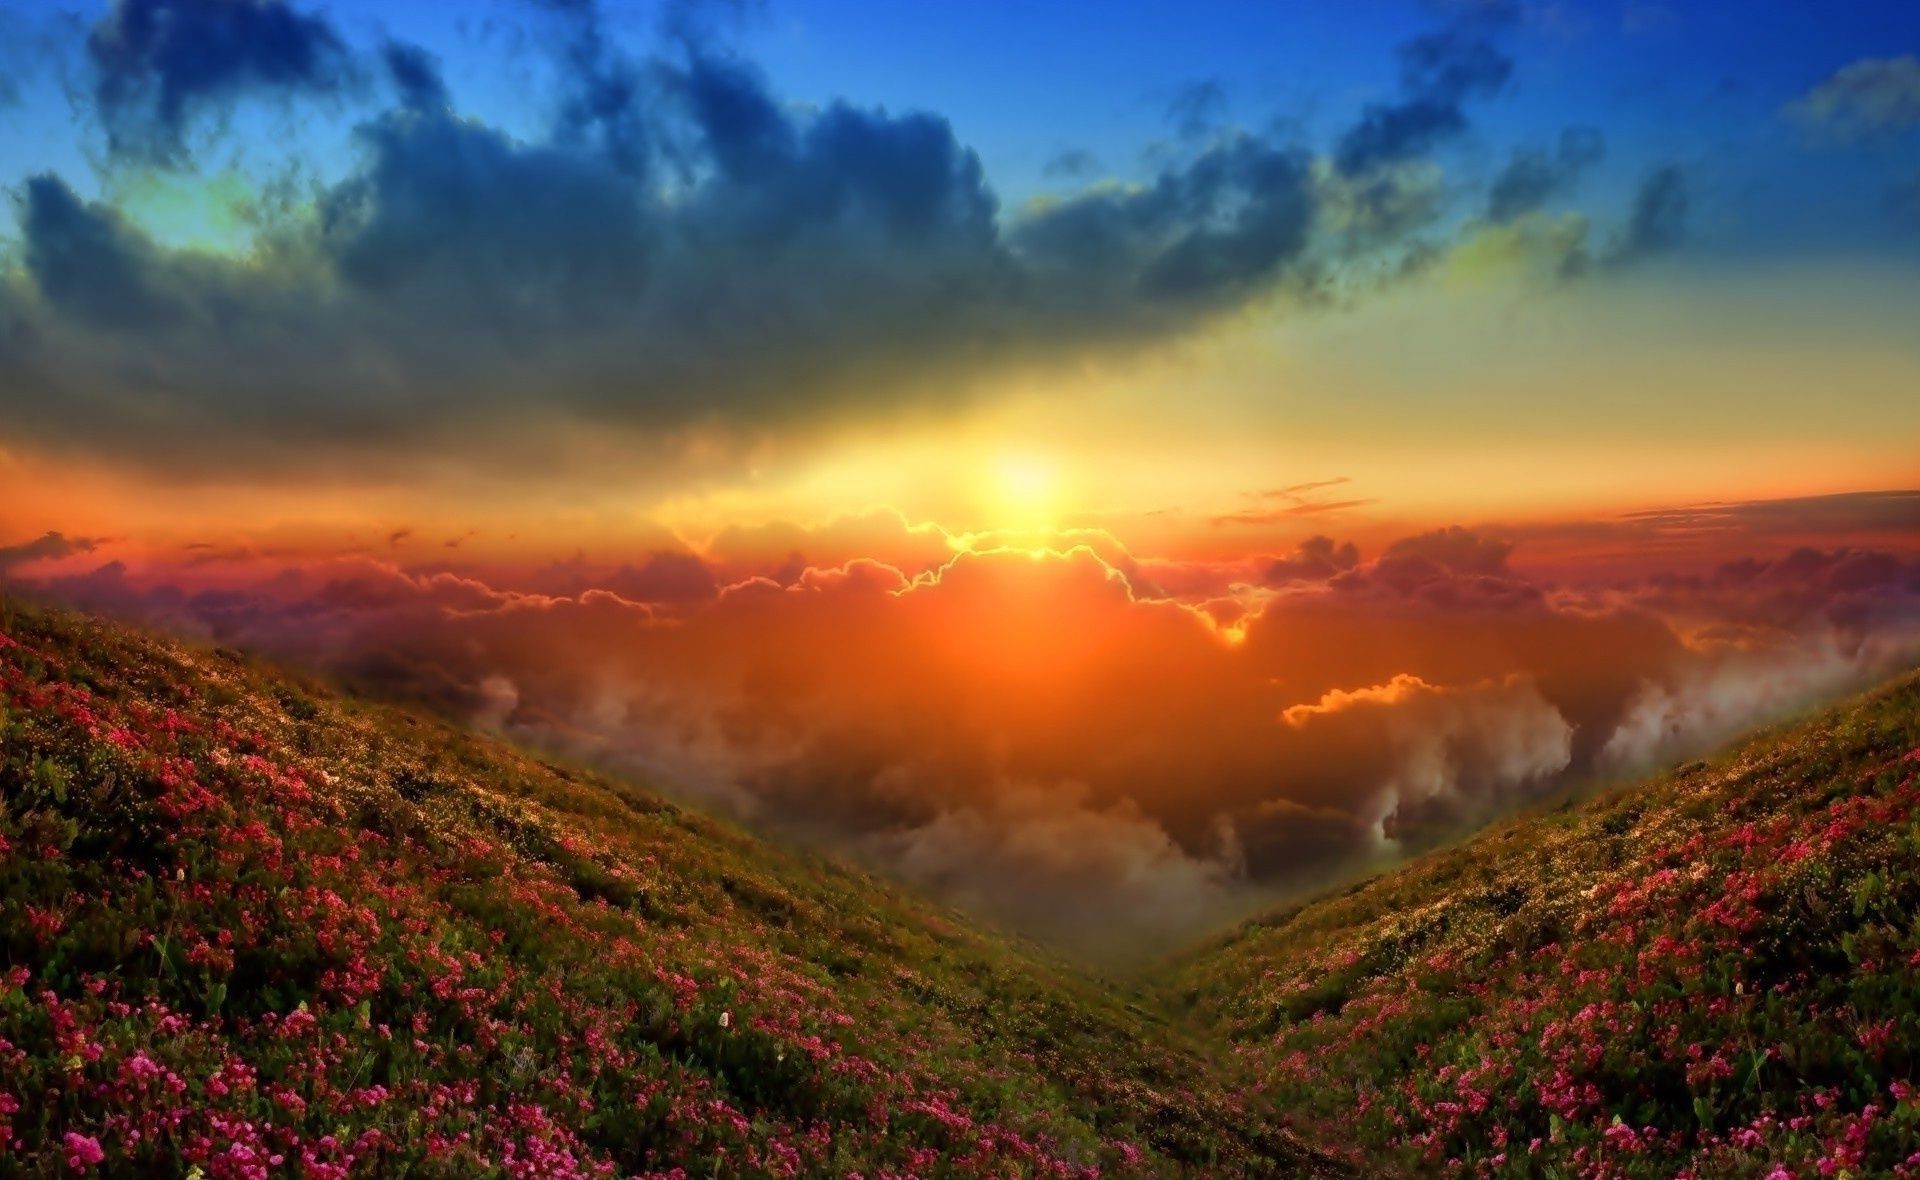 the sunset and sunrise sunset landscape nature dawn mountain sky outdoors travel evening sun scenic